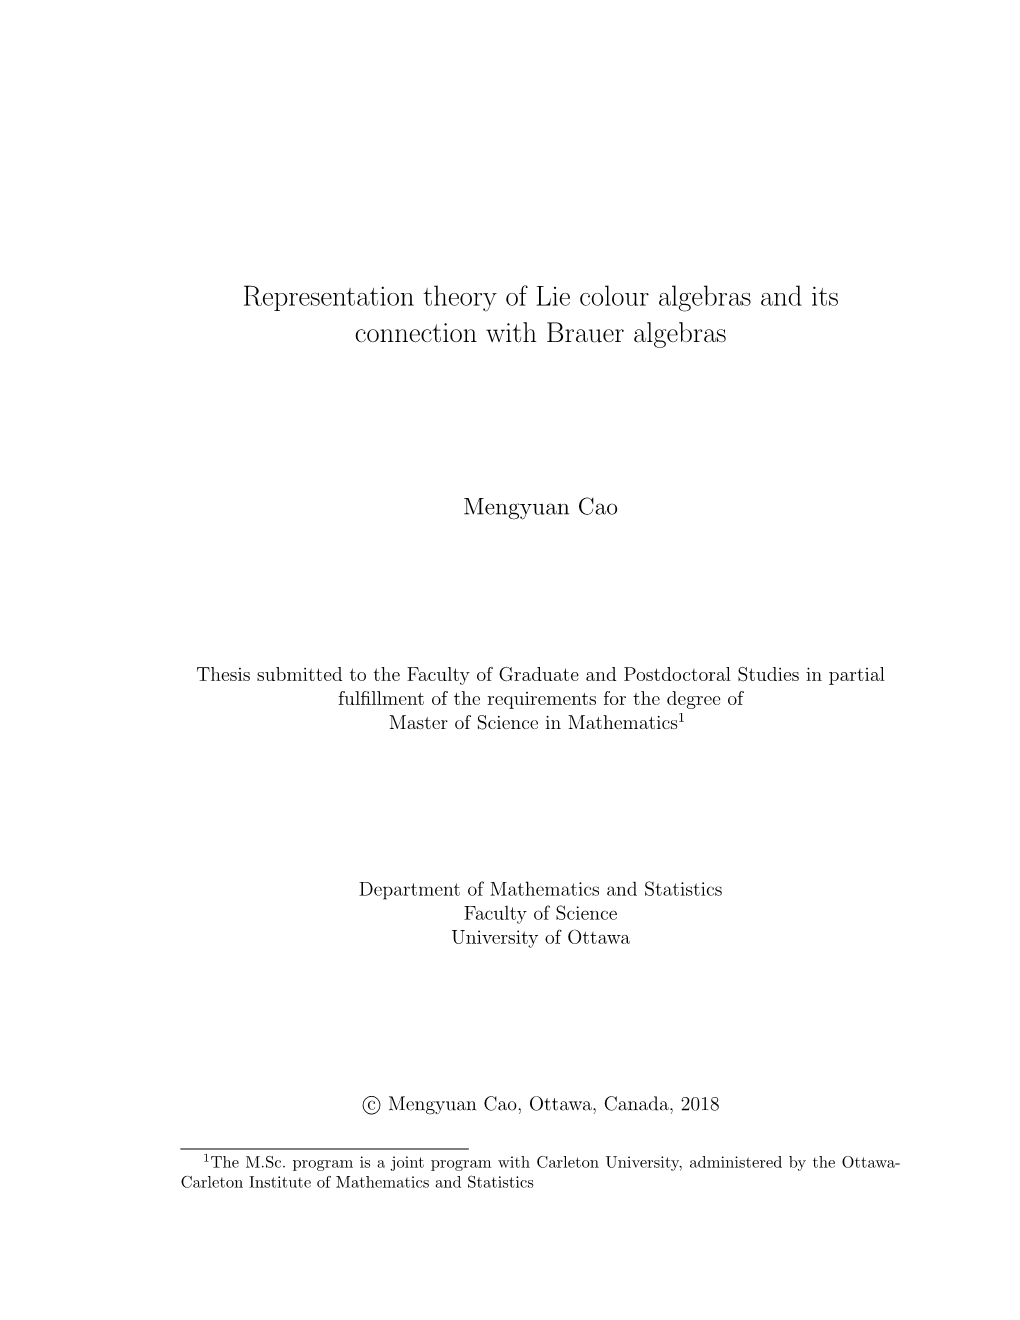 Representation Theory of Lie Colour Algebras and Its Connection with Brauer Algebras